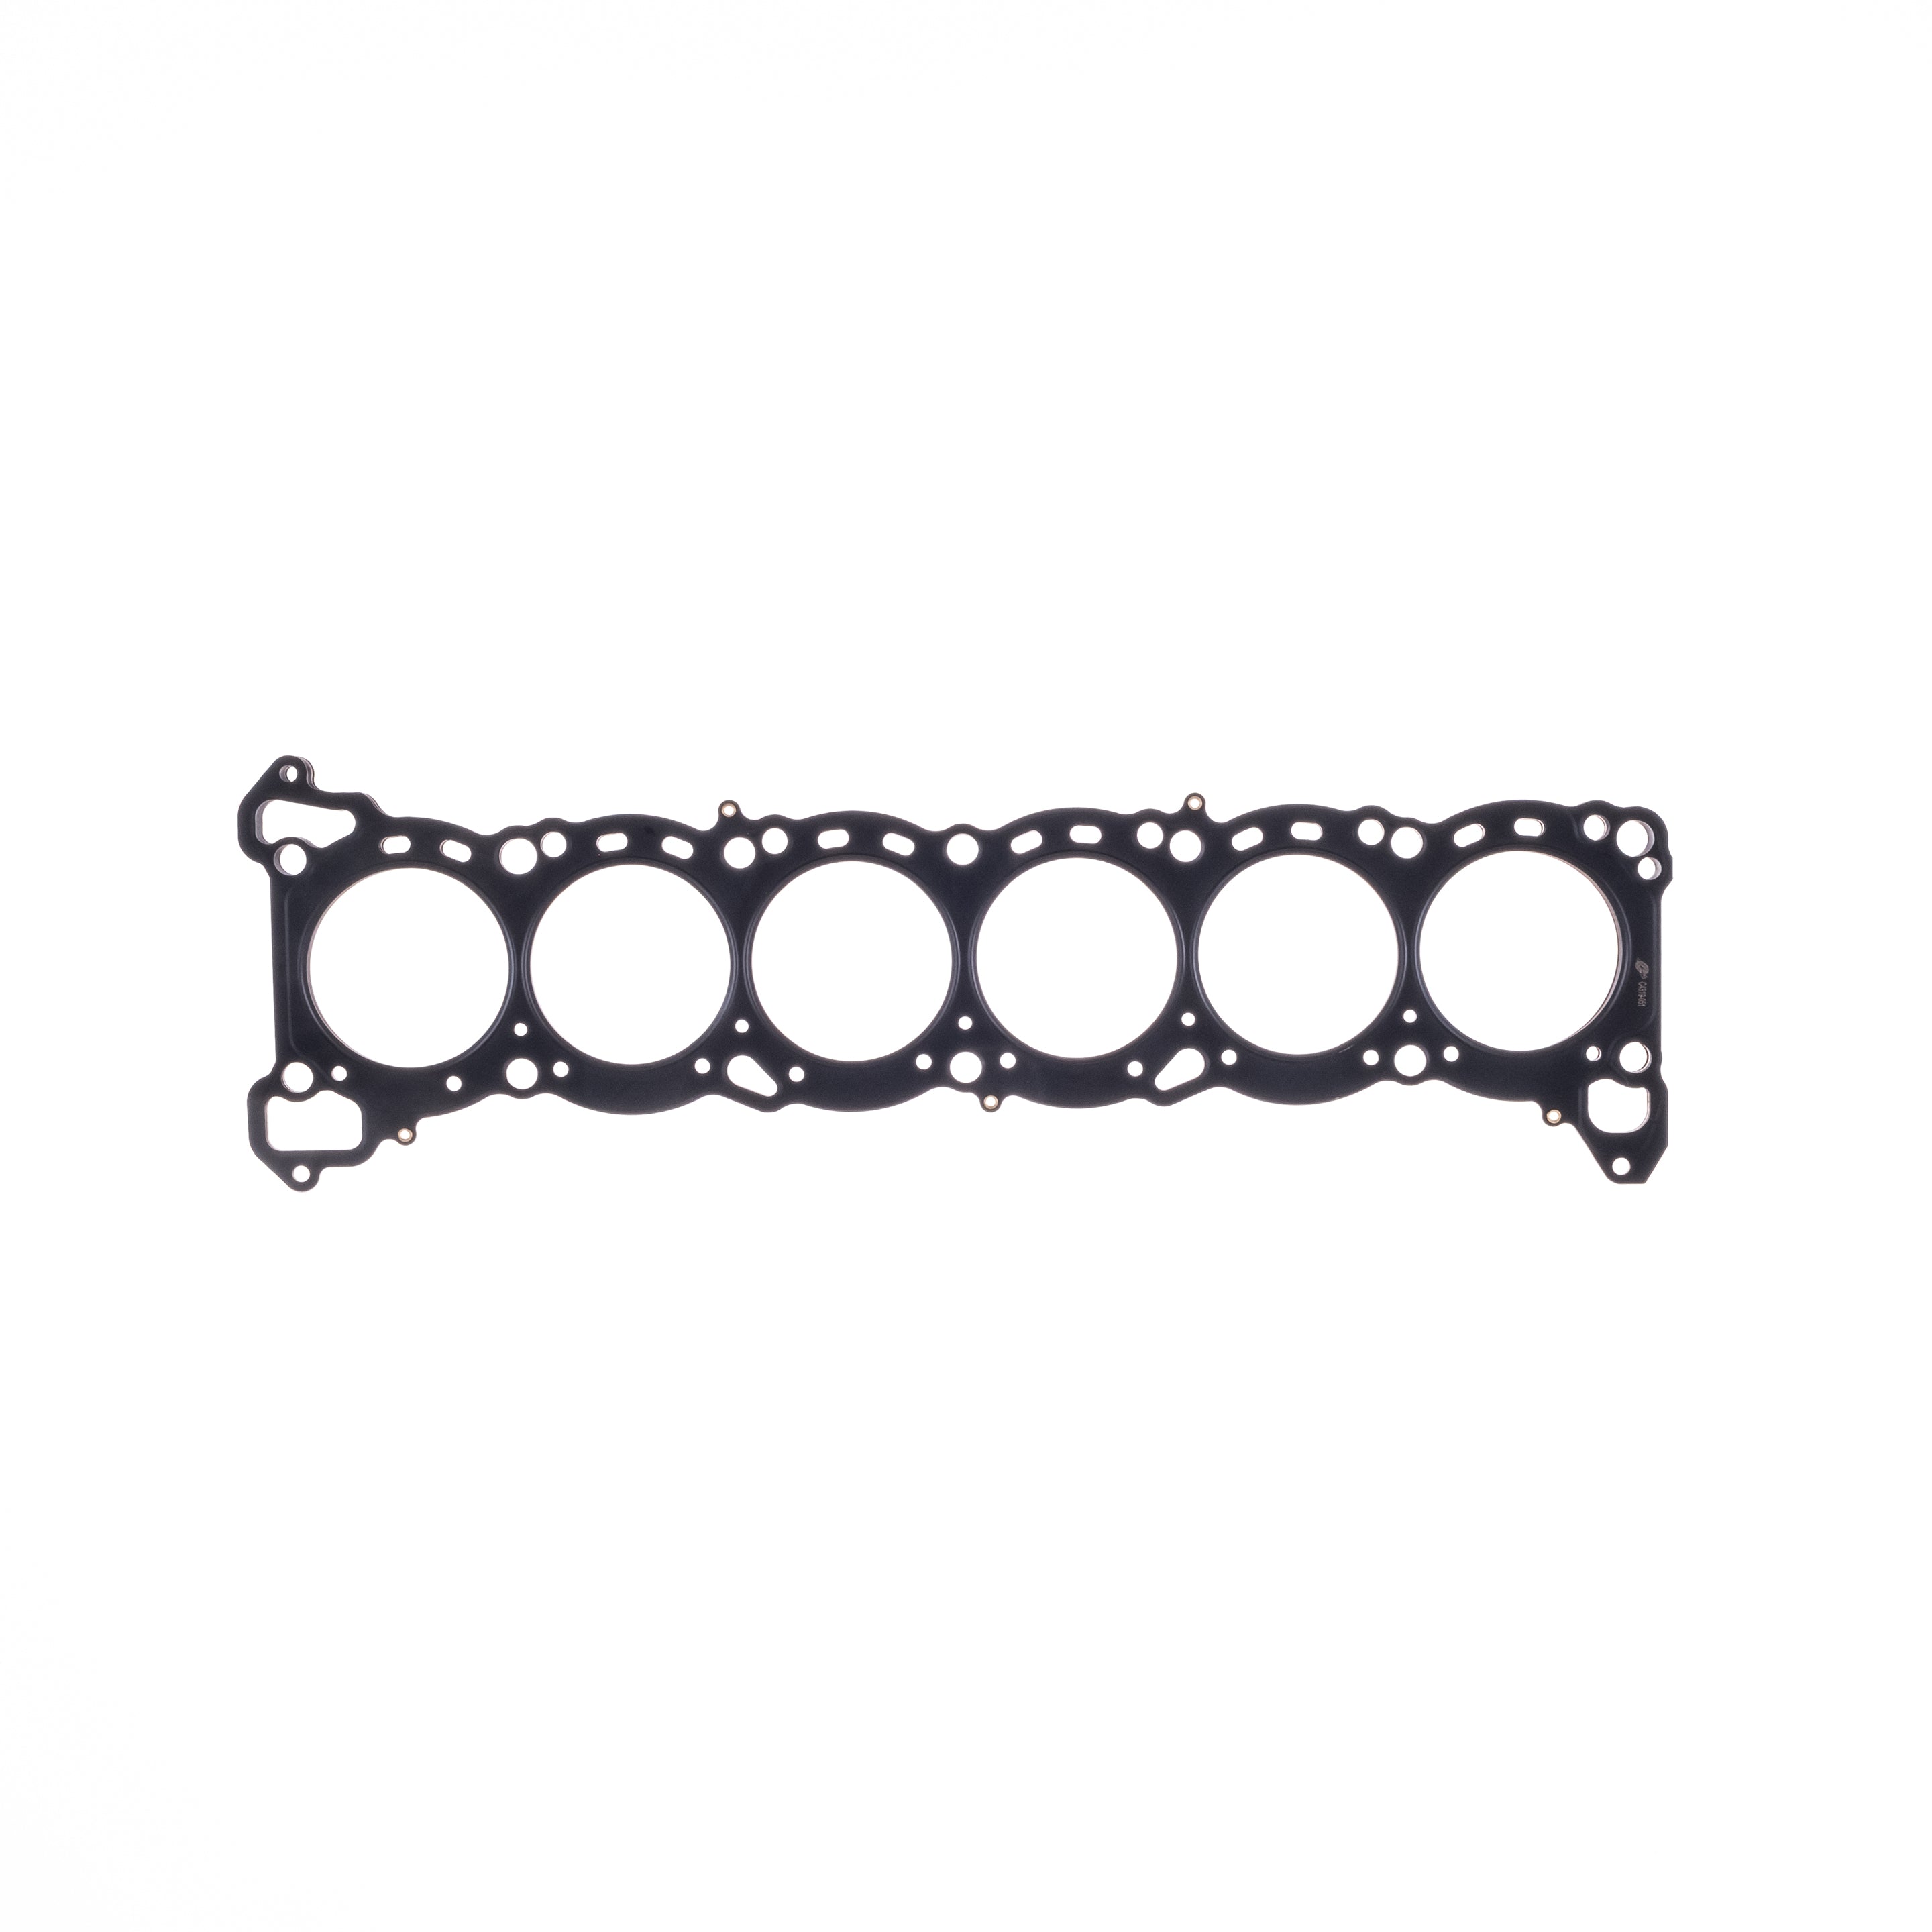 Cometic Nissan RB26 Head Gasket 1.3mm Thick (87mm) - C4320-051